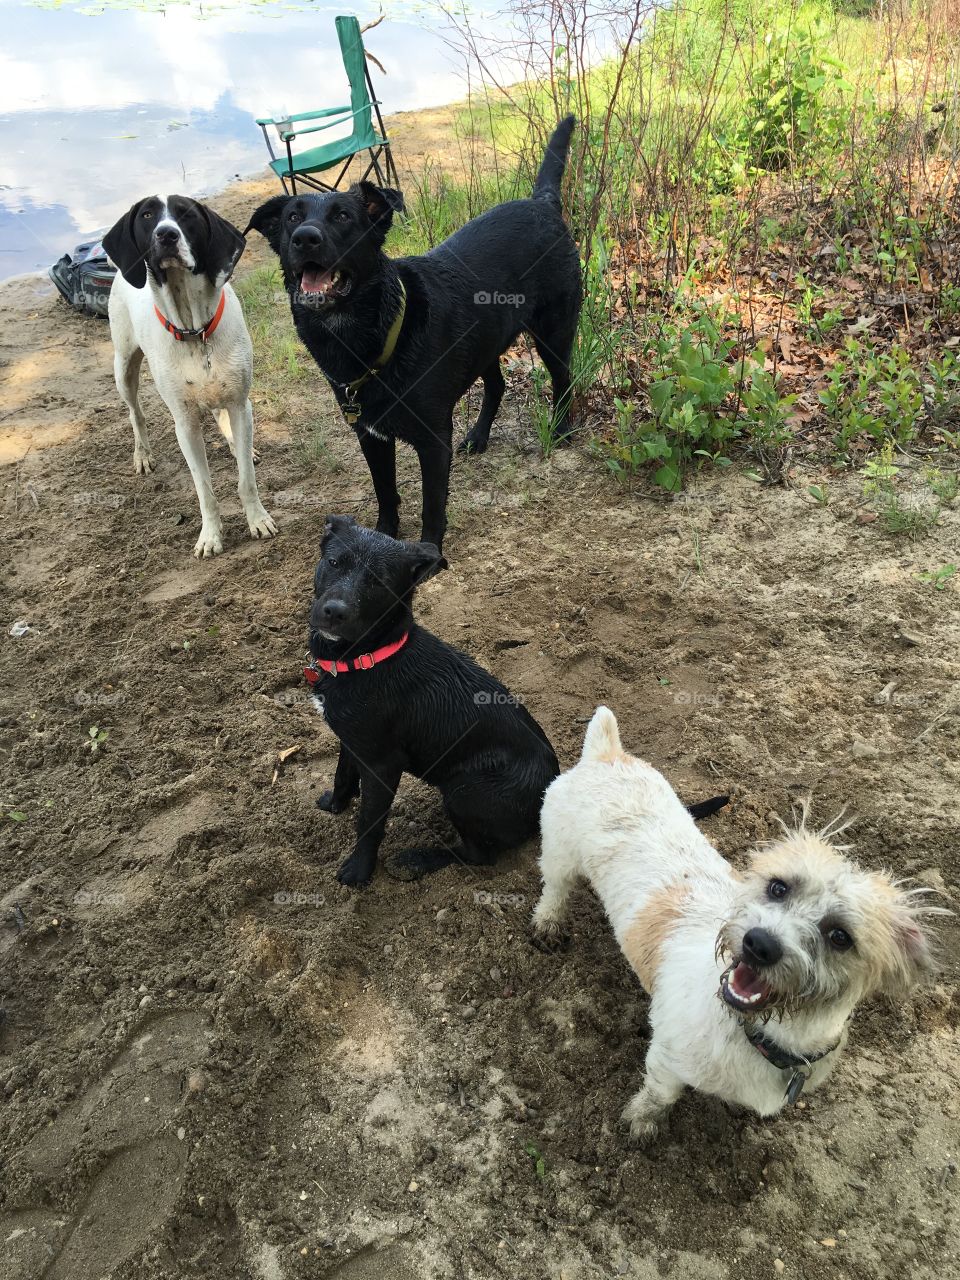 Group doggie outing